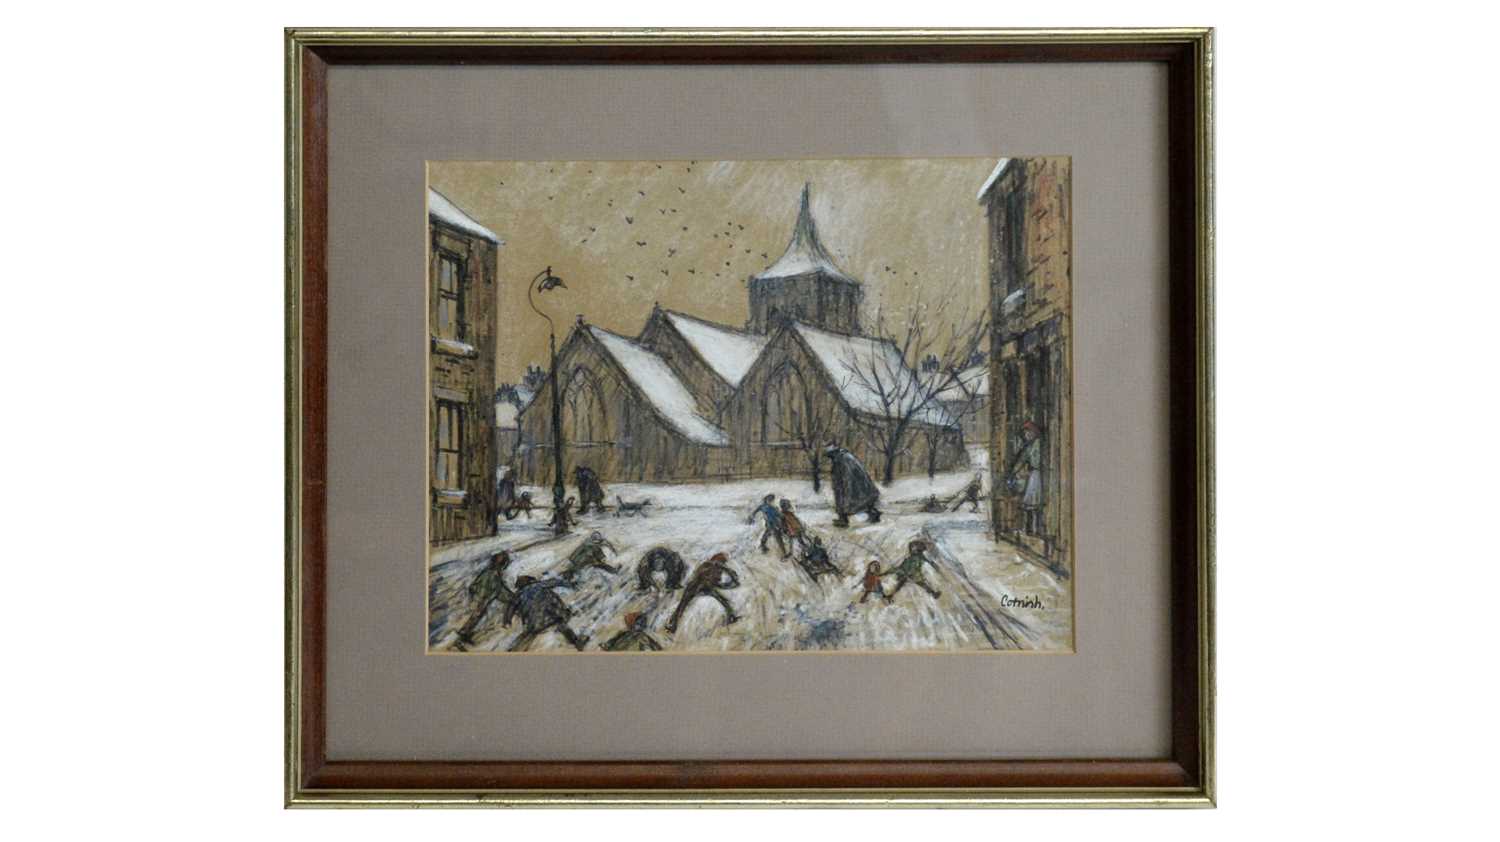 Lot 556 - Norman Cornish - Street Scene with Snow | ink and pastel